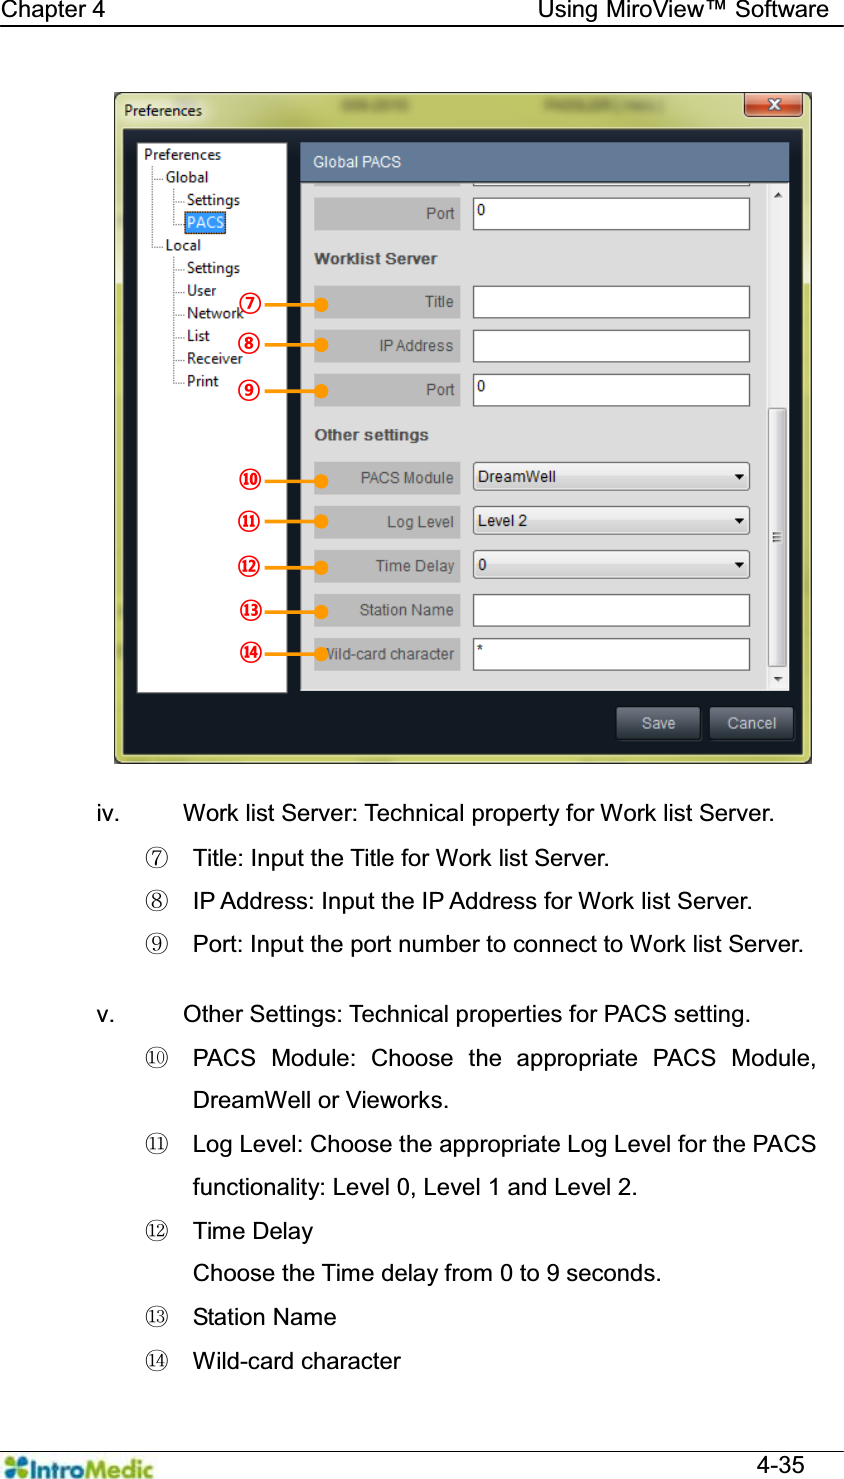   Chapter 4                                    Using 0LUR9LHZ Software  4-35  iv.  Work list Server: Technical property for Work list Server. ཡ  Title: Input the Title for Work list Server. ར  IP Address: Input the IP Address for Work list Server. ལ  Port: Input the port number to connect to Work list Server.  v.  Other Settings: Technical properties for PACS setting. ཤ  PACS Module: Choose the appropriate PACS Module, DreamWell or Vieworks. ཥ  Log Level: Choose the appropriate Log Level for the PACS functionality: Level 0, Level 1 and Level 2. ས Time Delay Choose the Time delay from 0 to 9 seconds. ཧ Station Name ཨ Wild-card character ¯ ®  ¬ ª © ¨ « 